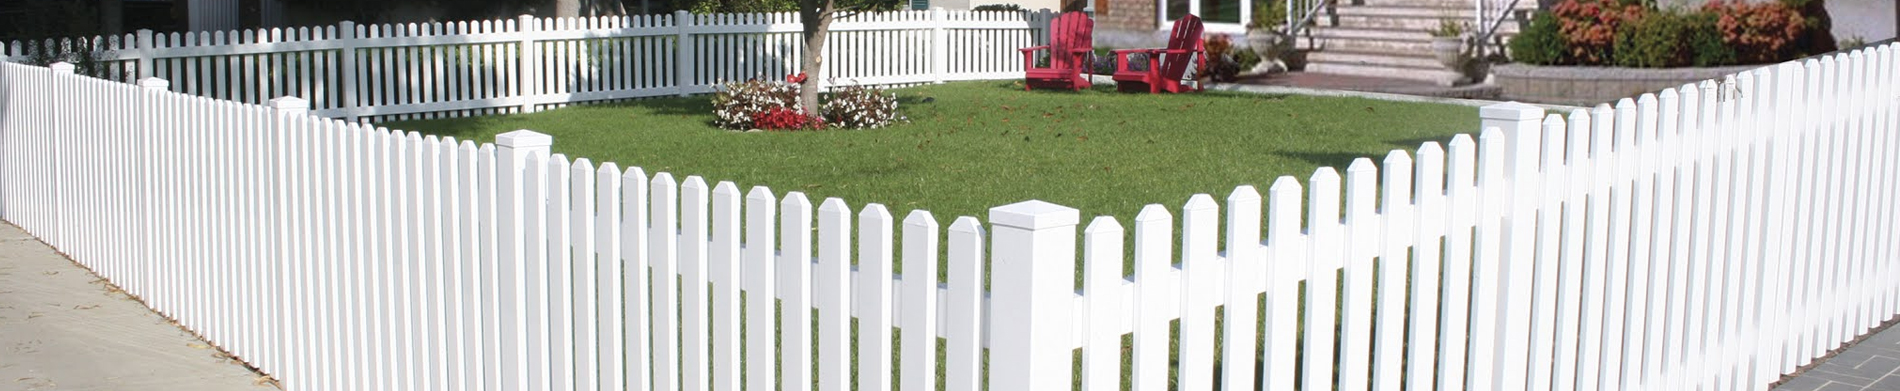 Some Fun Facts You Should Know About Vinyl Fencing